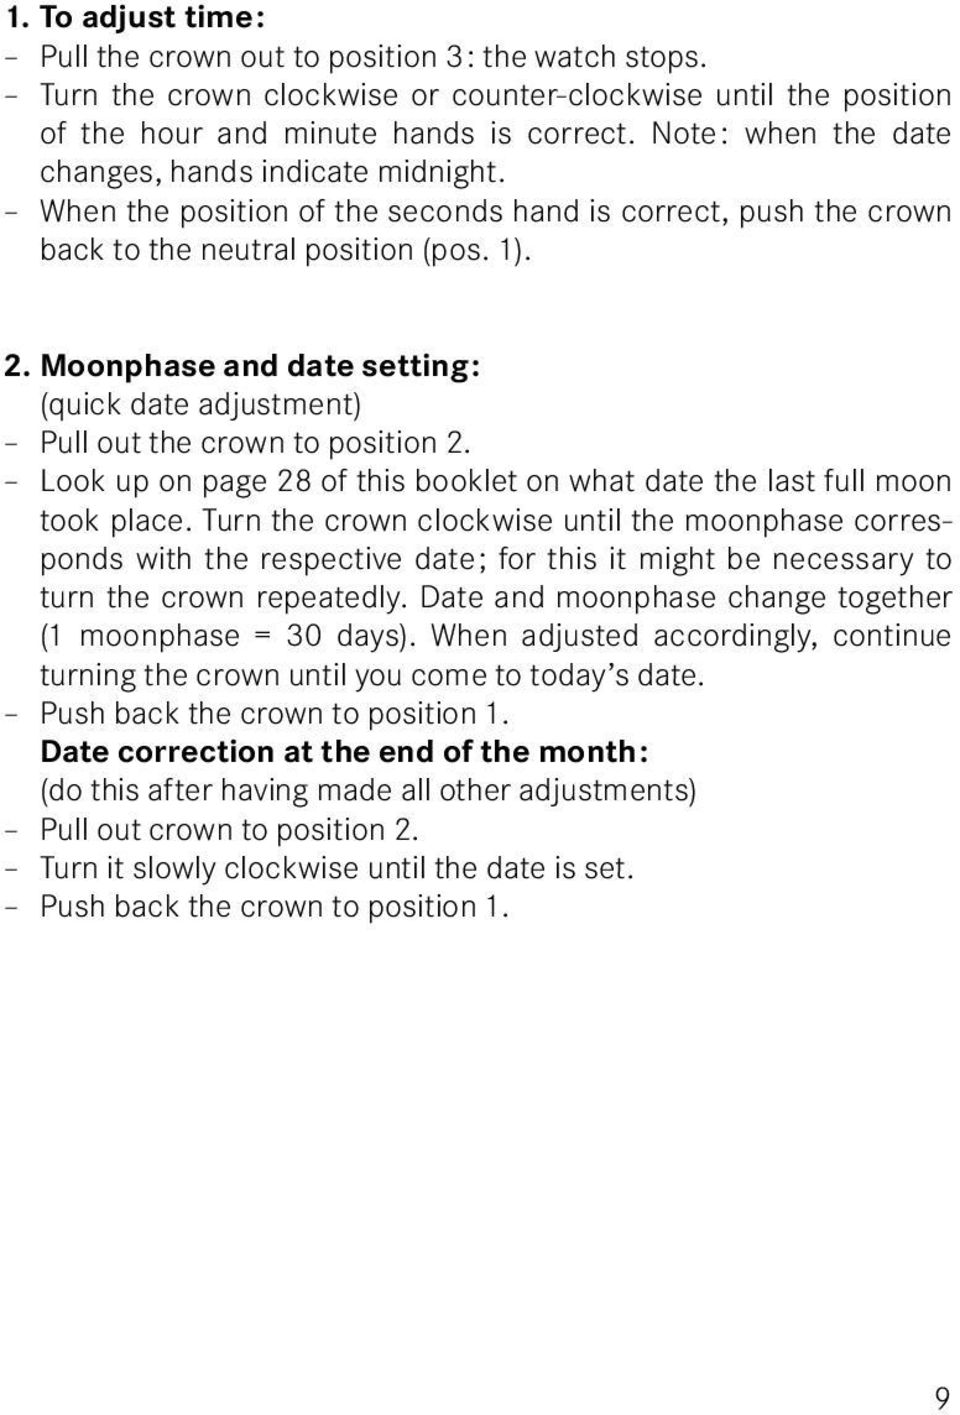 Moonphase and date setting : (quick date adjustment) Pull out the crown to position 2. Look up on page 28 of this booklet on what date the last full moon took place.